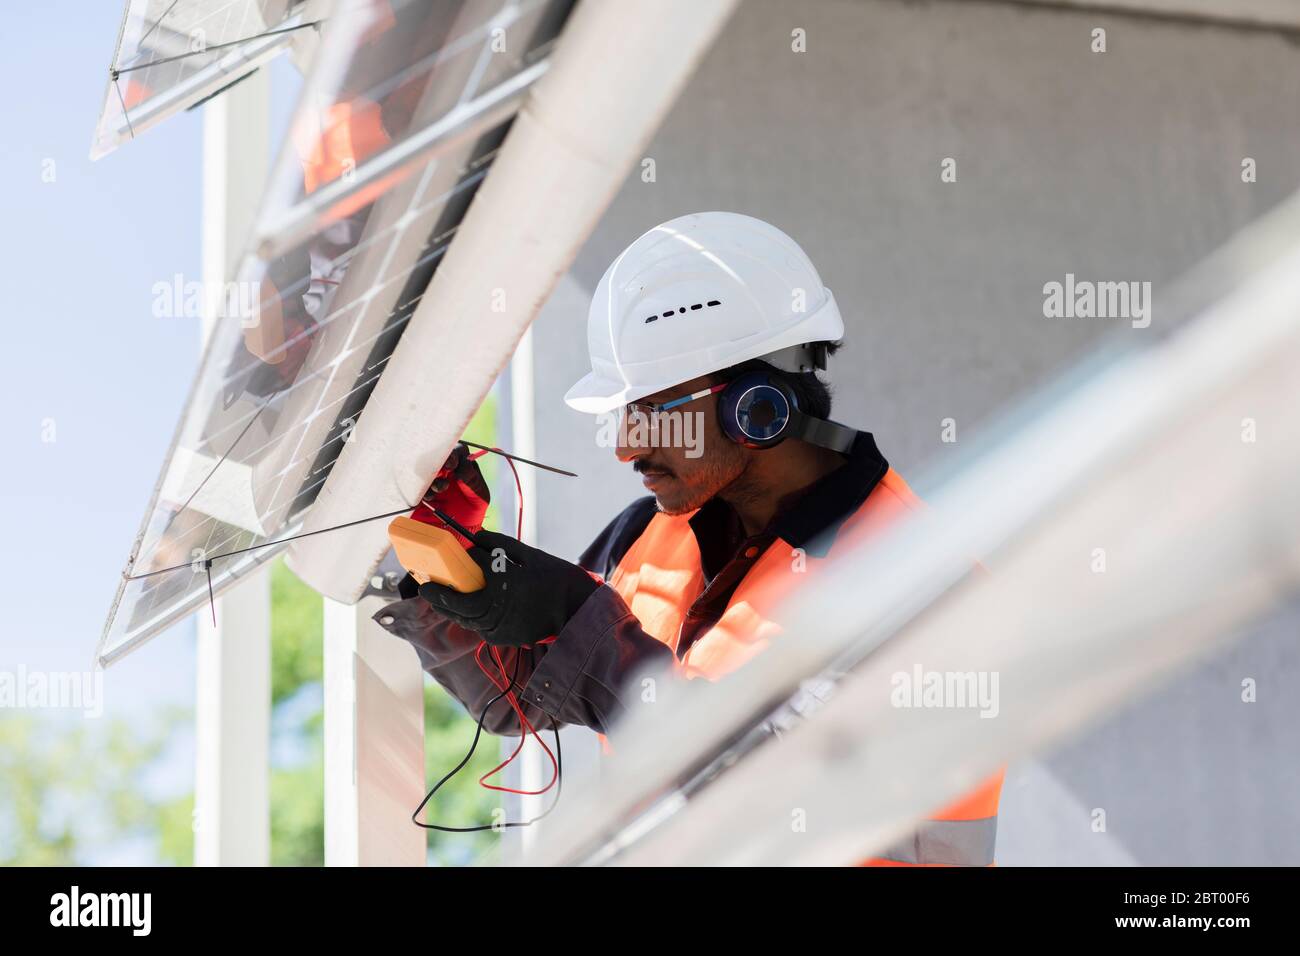 Male engineer wearing hardhat and ear protectors working on construction site. Stock Photo